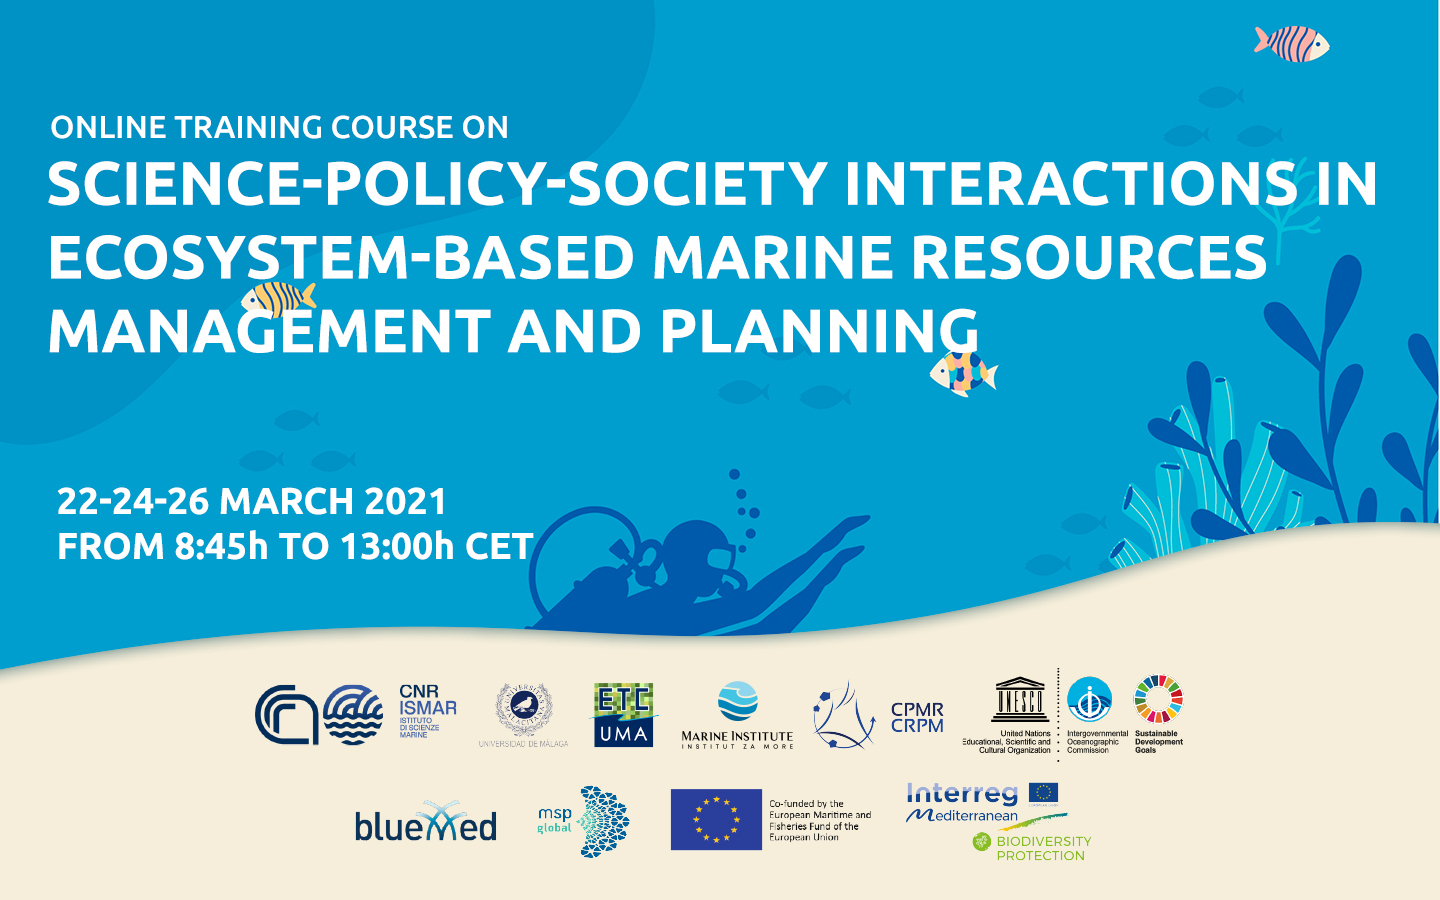 “Science-Policy-Society interactions in ecosystem-based marine resources management and planning” course ready to start! March 22,24,26, online